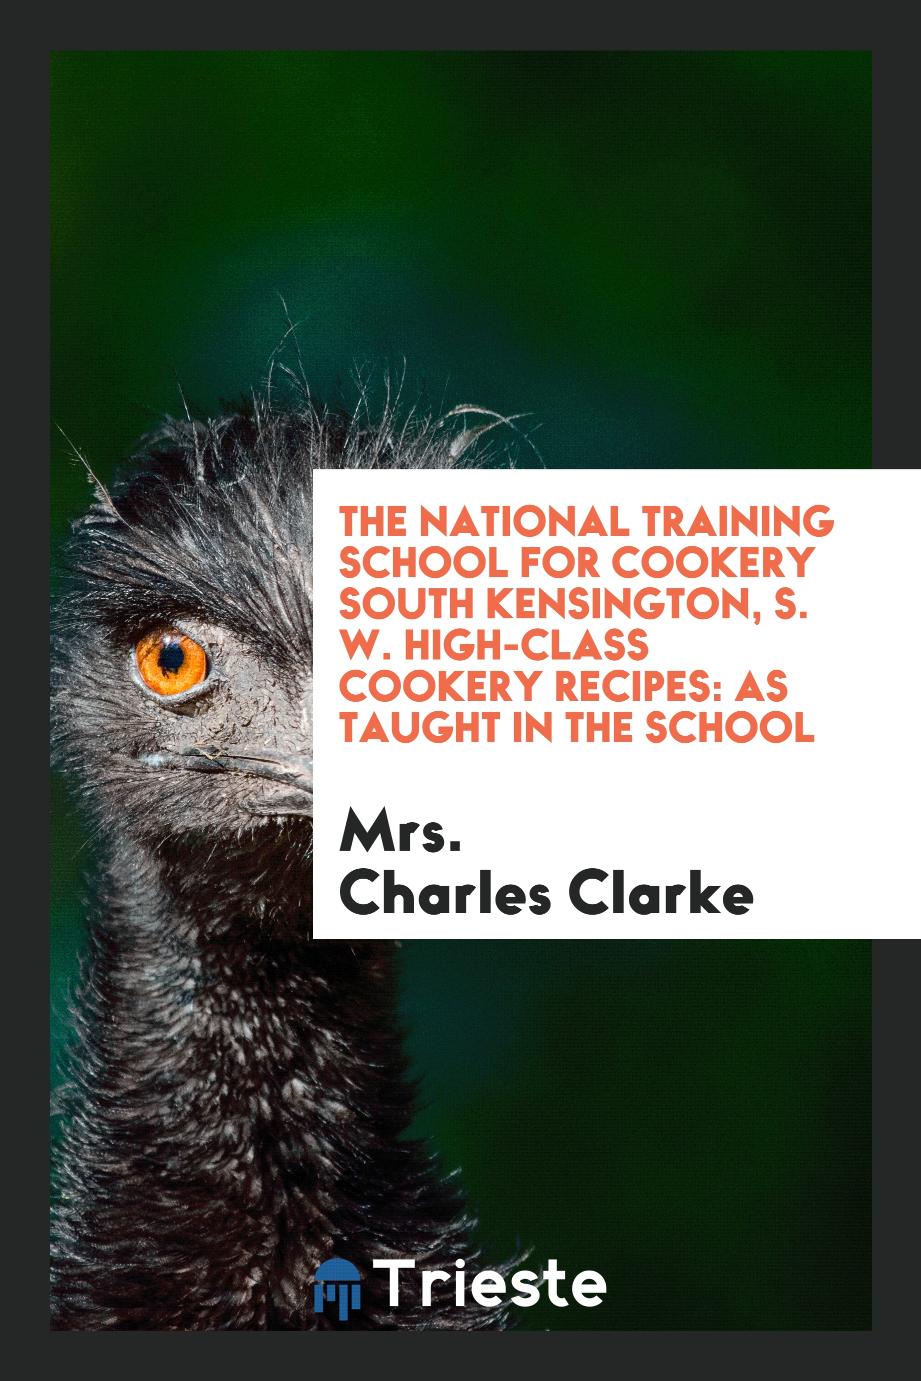 The National Training School for Cookery South Kensington, S. W. High-Class Cookery Recipes: As Taught in the School